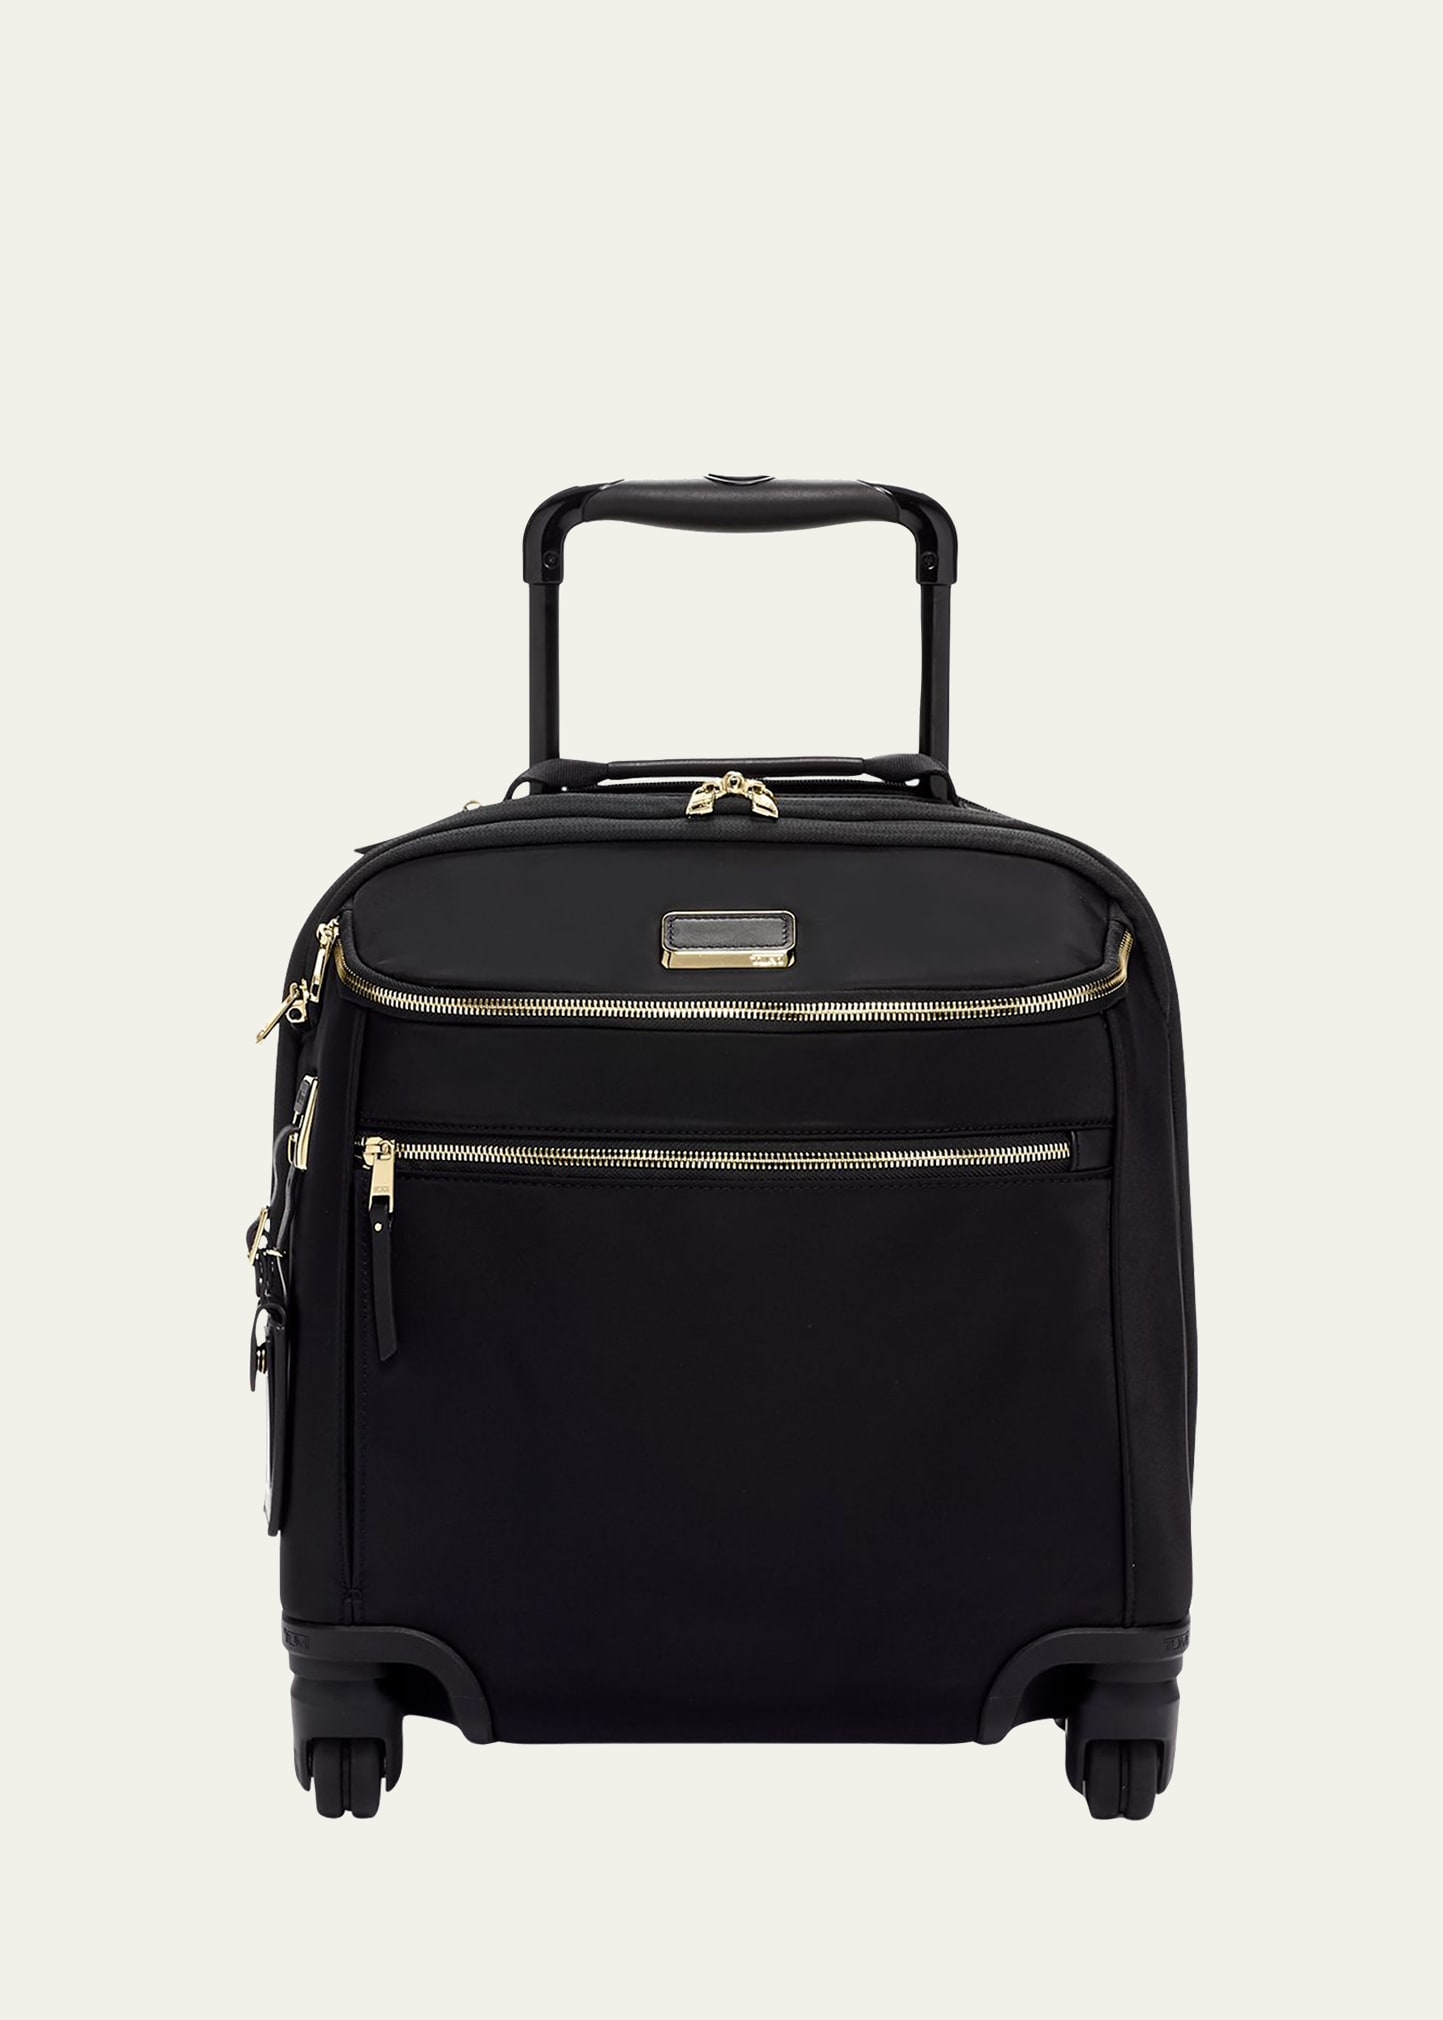 Oxford Compact Carry-On Luggage, Black